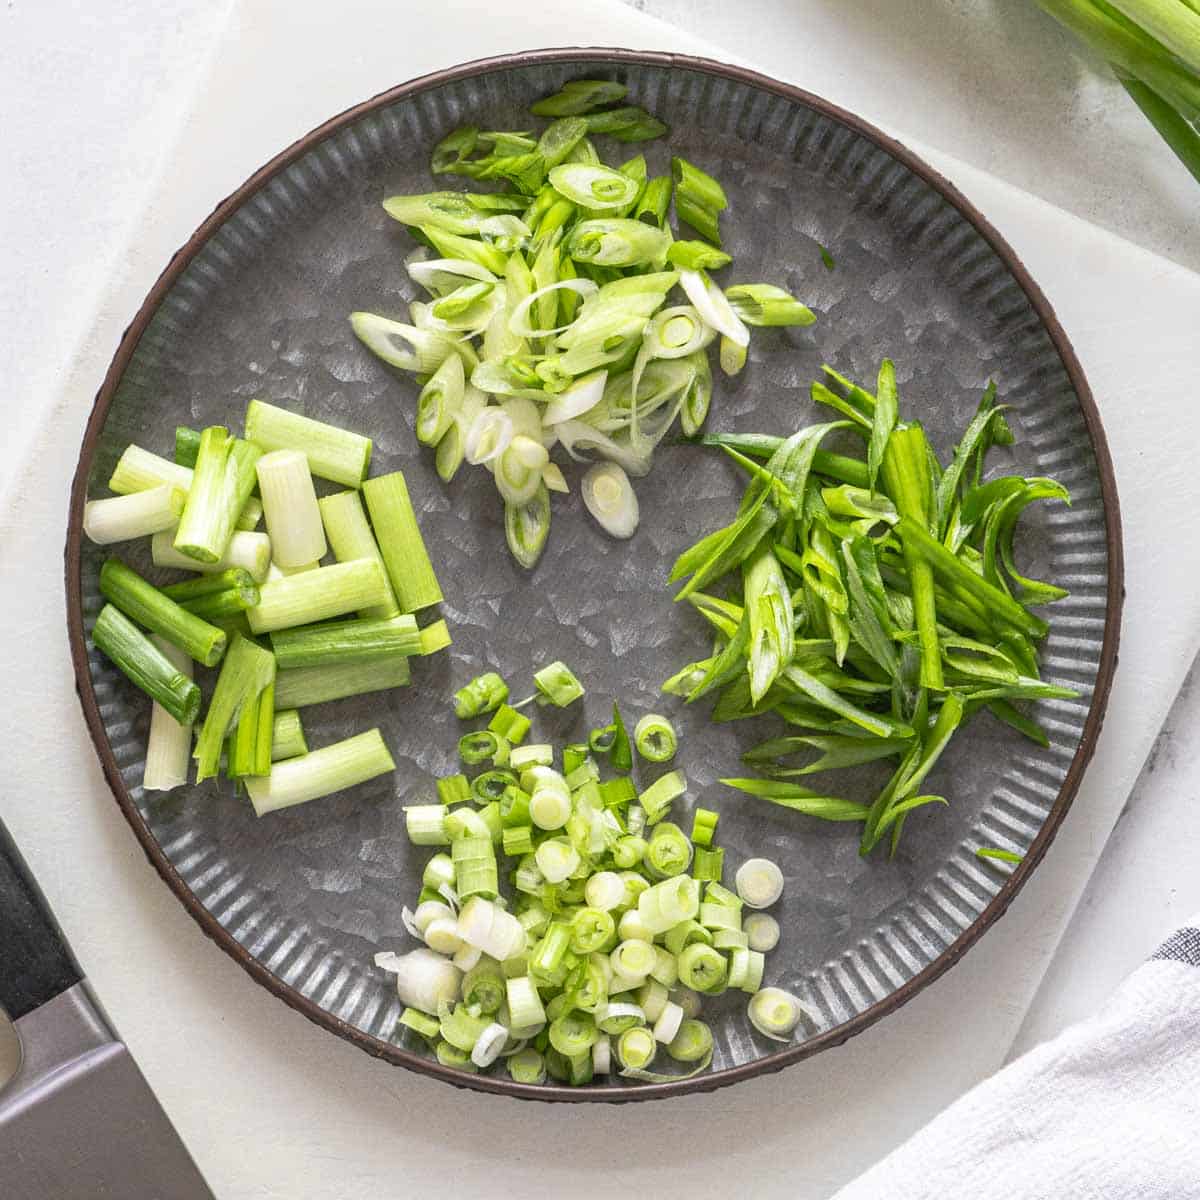 https://www.peelwithzeal.com/wp-content/uploads/2023/01/how-to-cut-green-onions.jpg